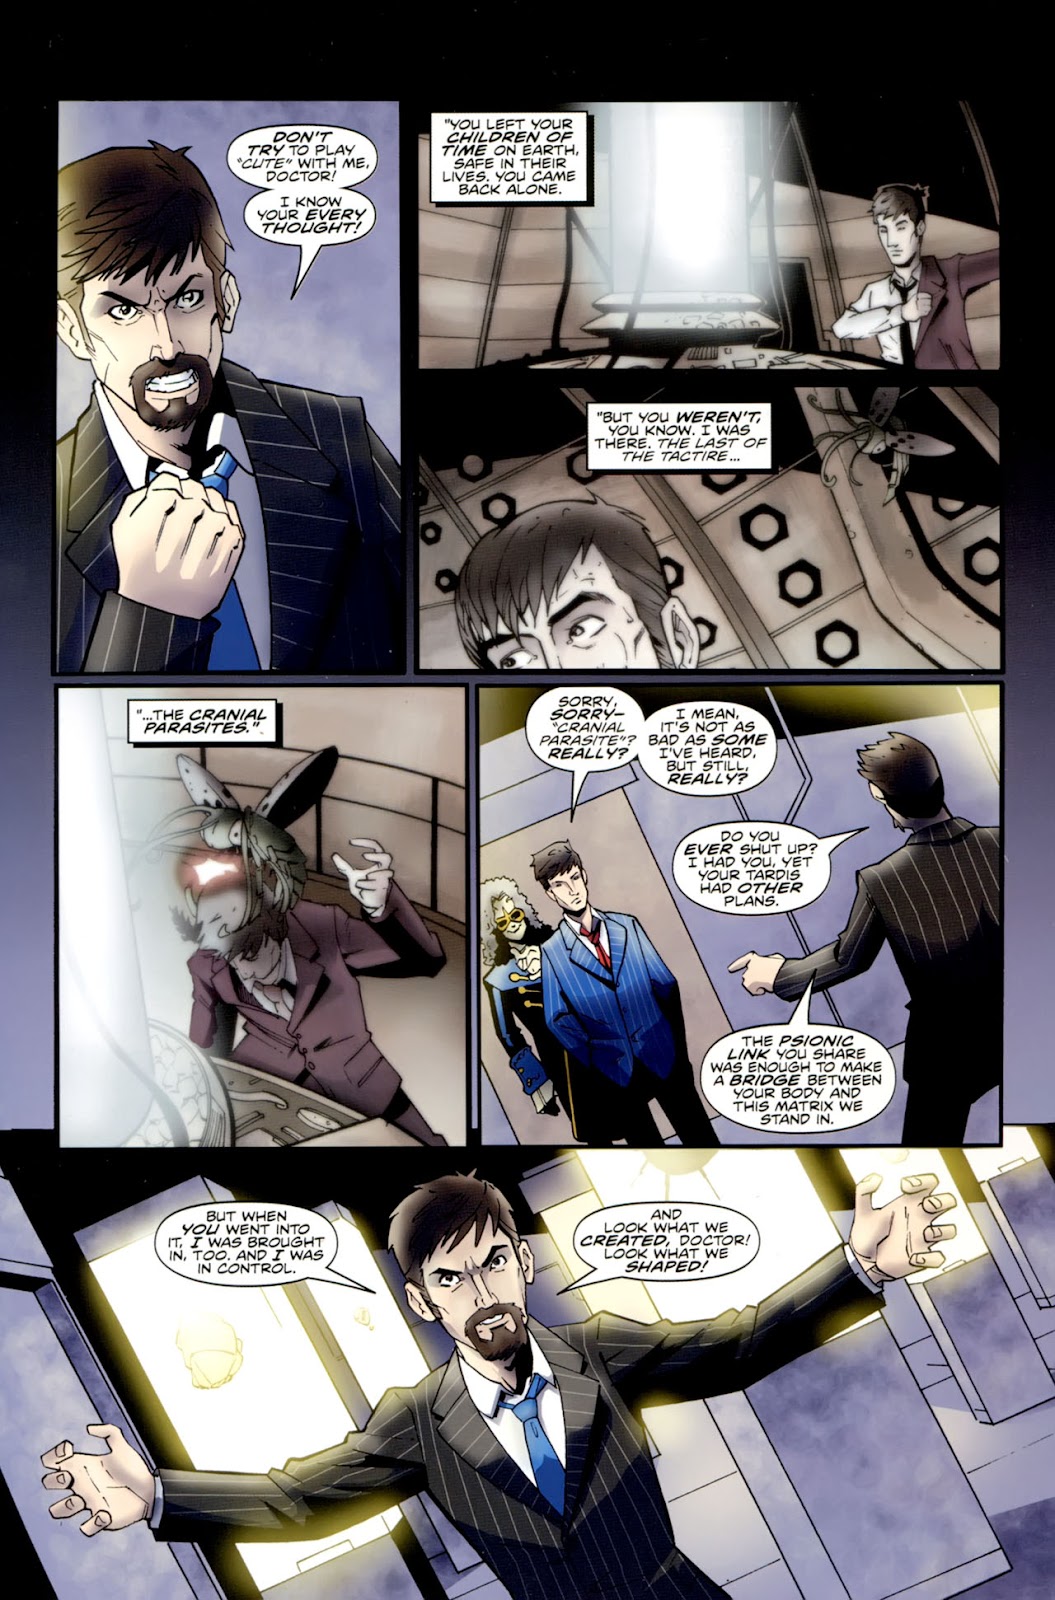 Doctor Who: The Forgotten issue 6 - Page 5